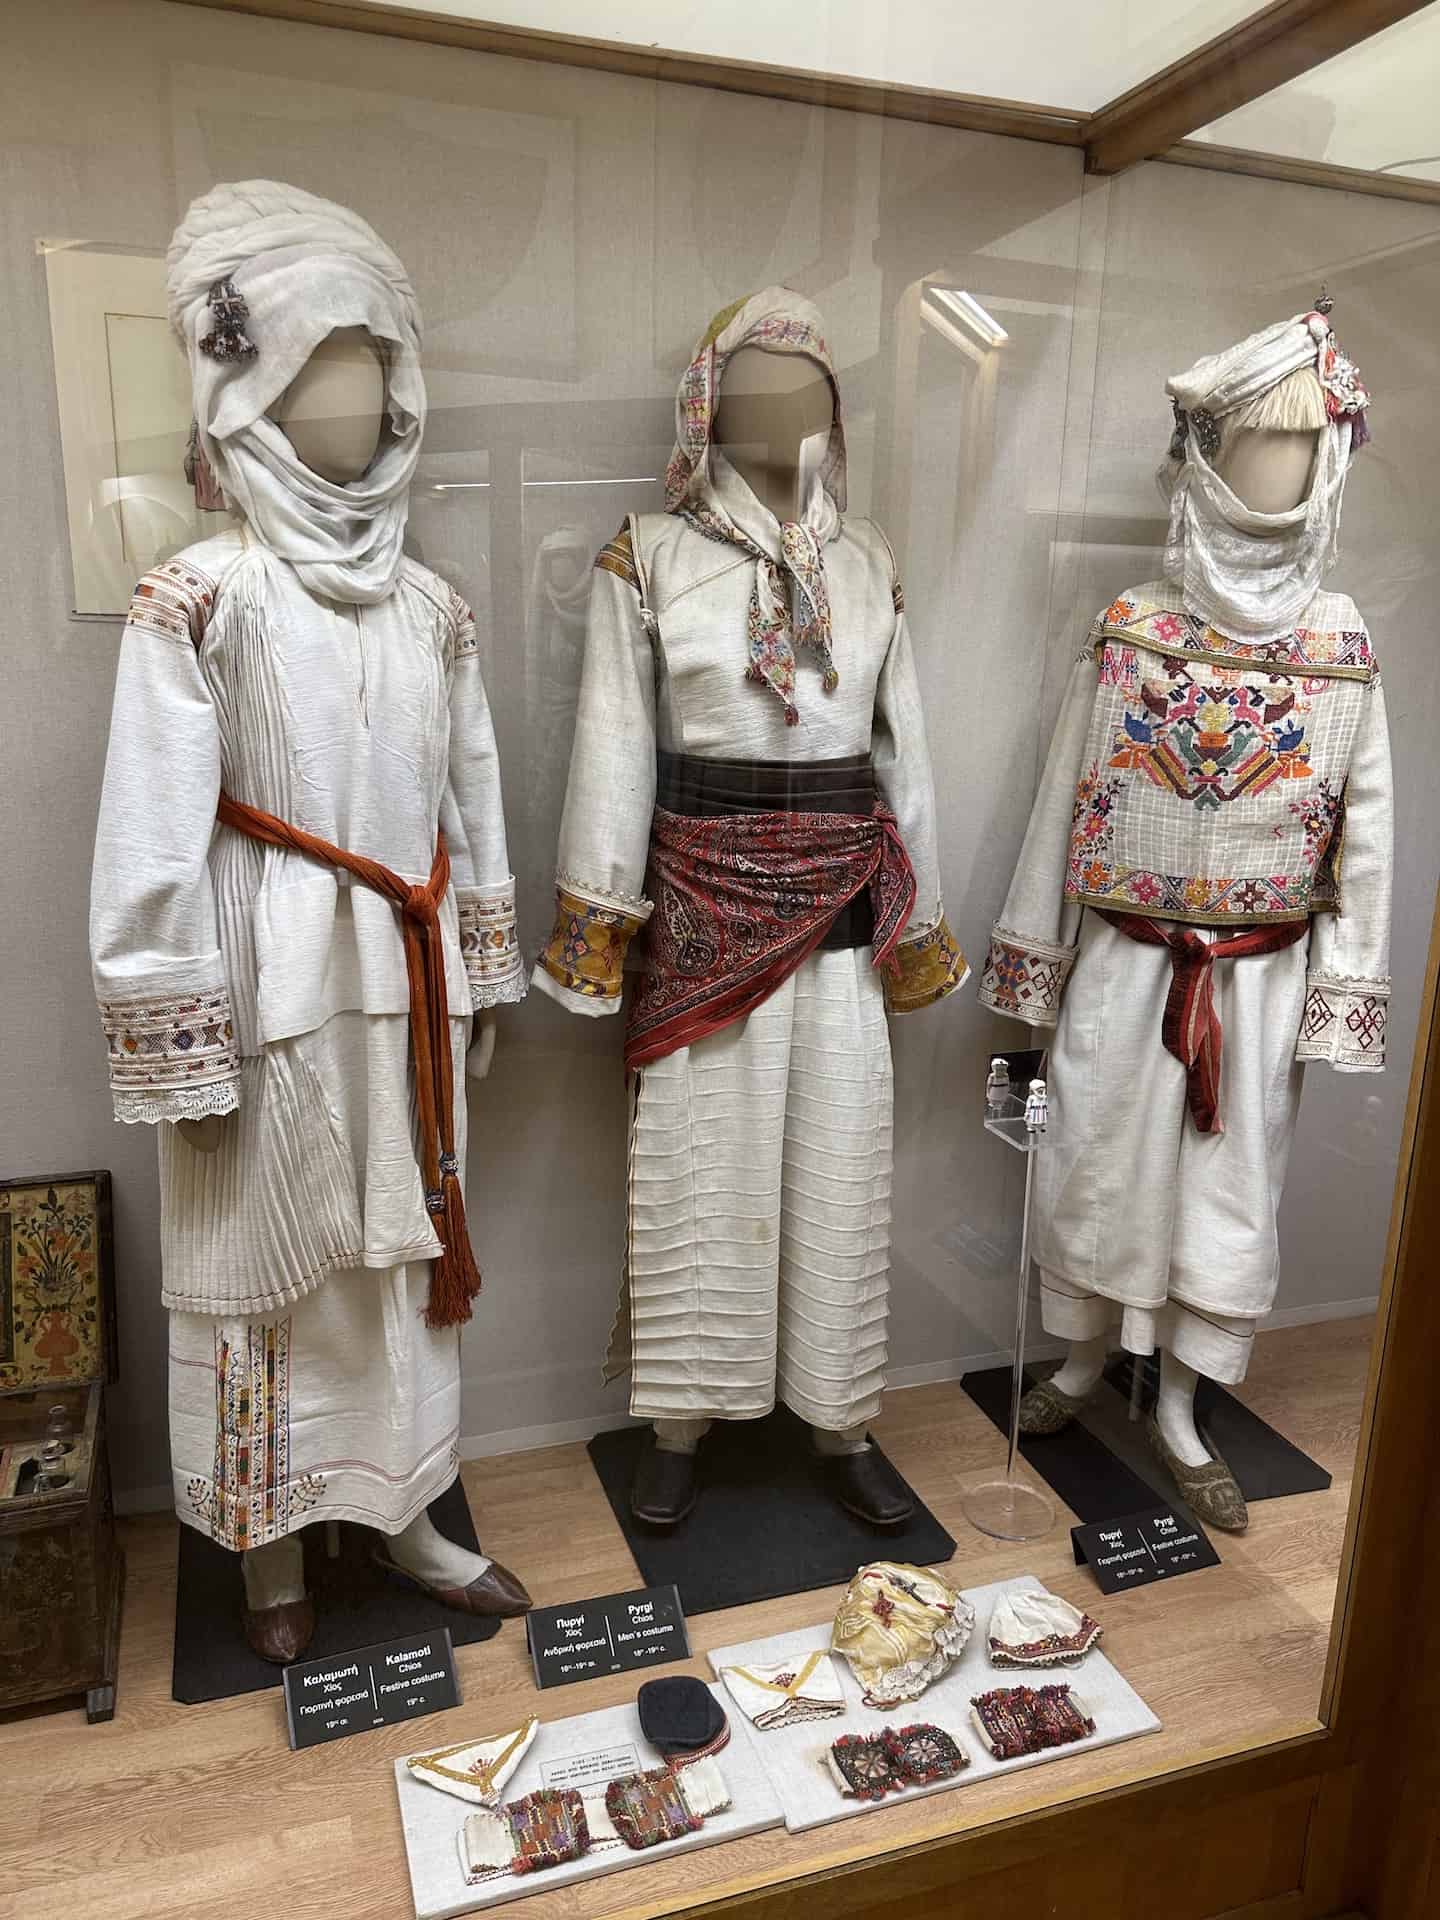 Festive costume from Kalamoti, Chios, 19th century (left); men's costume from Pyrgi, Chios, 18th-19th centuries (center); and festive costume from Pyrgi, Chios, 18th-19th centuries (right) at the National Historical Museum in Athens, Greece